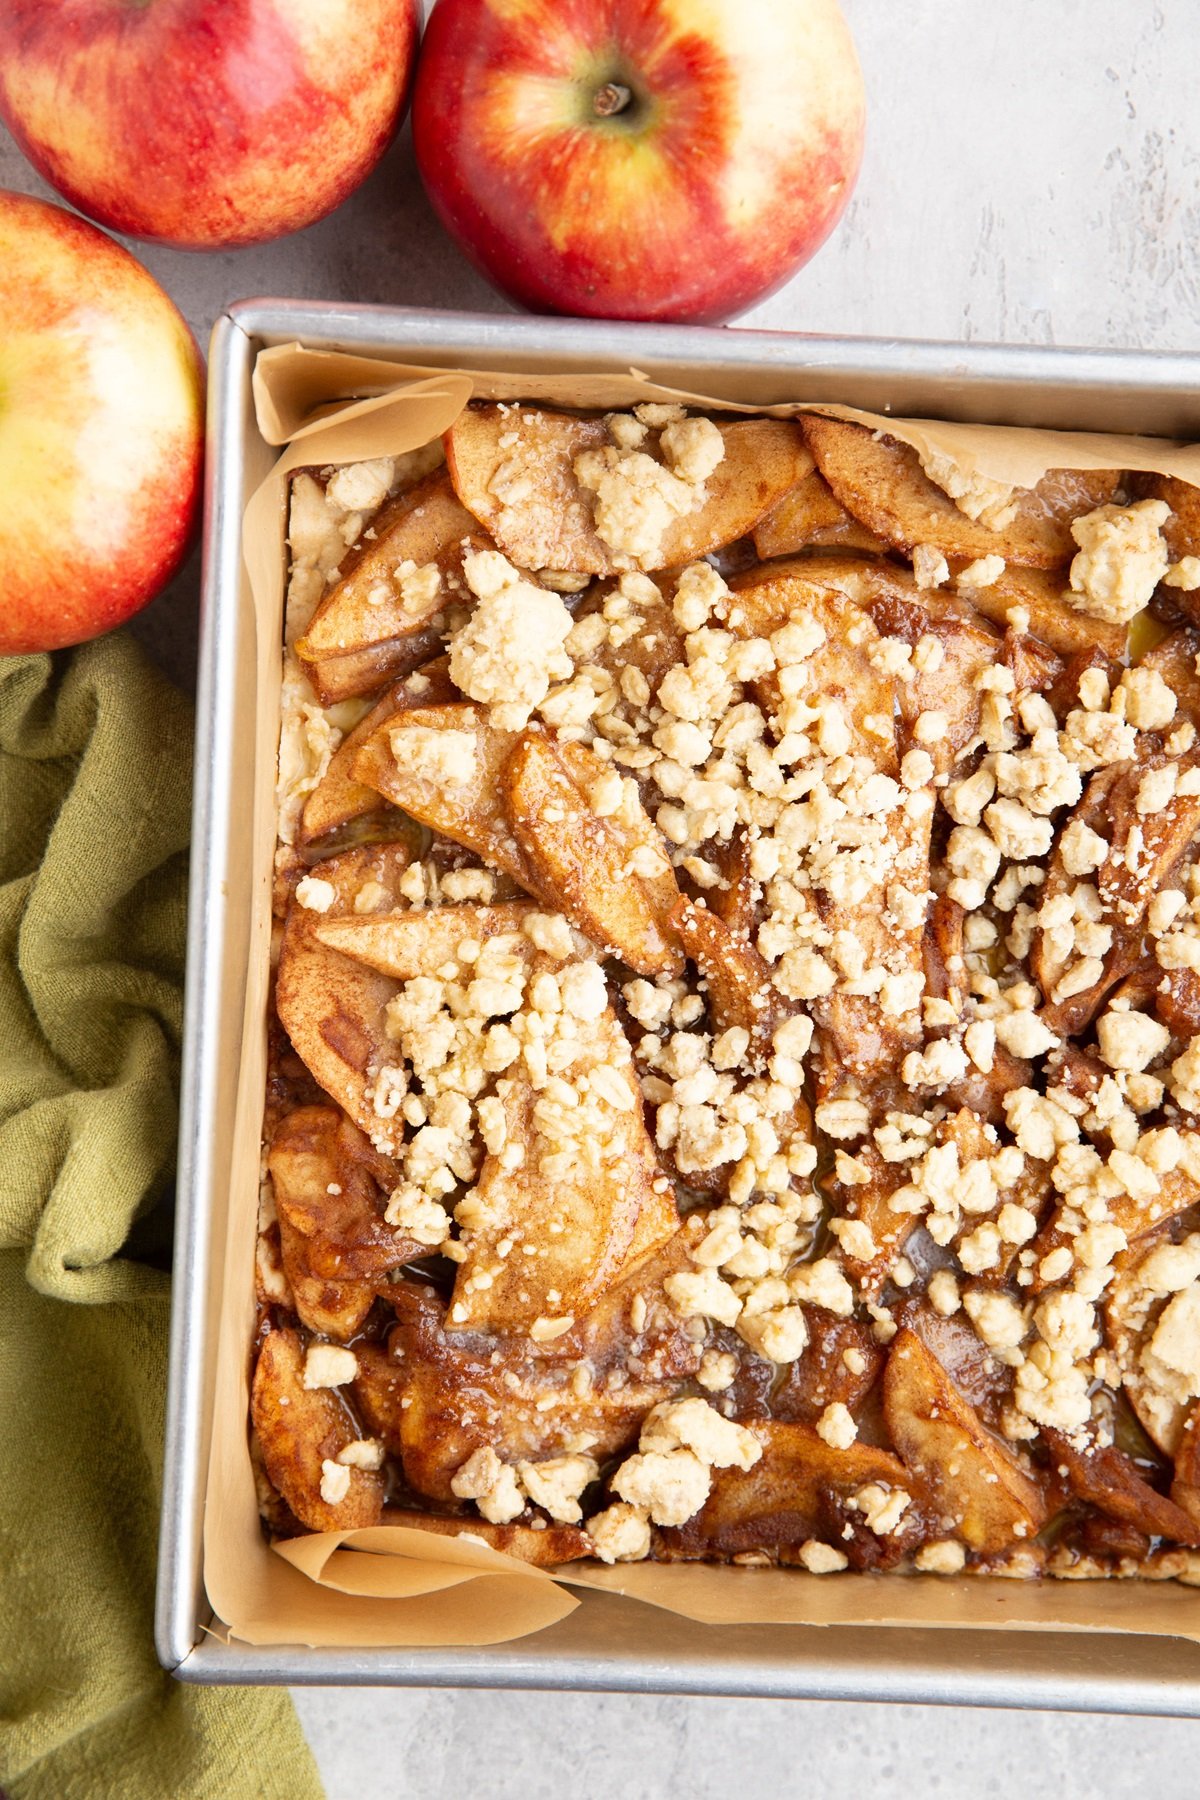 Baking pan with oatmeal apple crumb bars inside, fresh out of the oven and ready to serve.